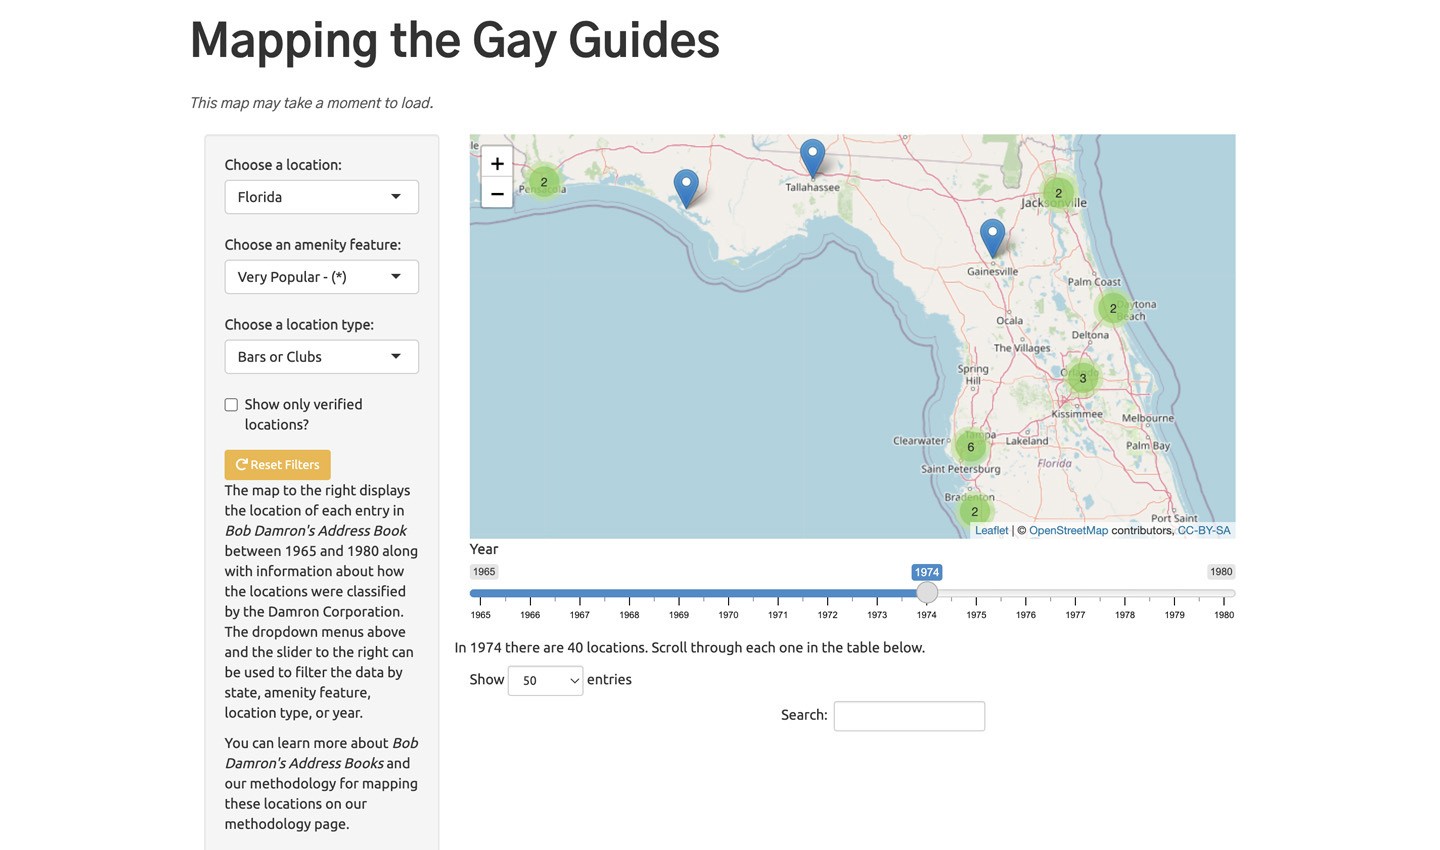 A screenshot of popular spots in 1974 Florida on the 'Mapping the Gay Guides' map